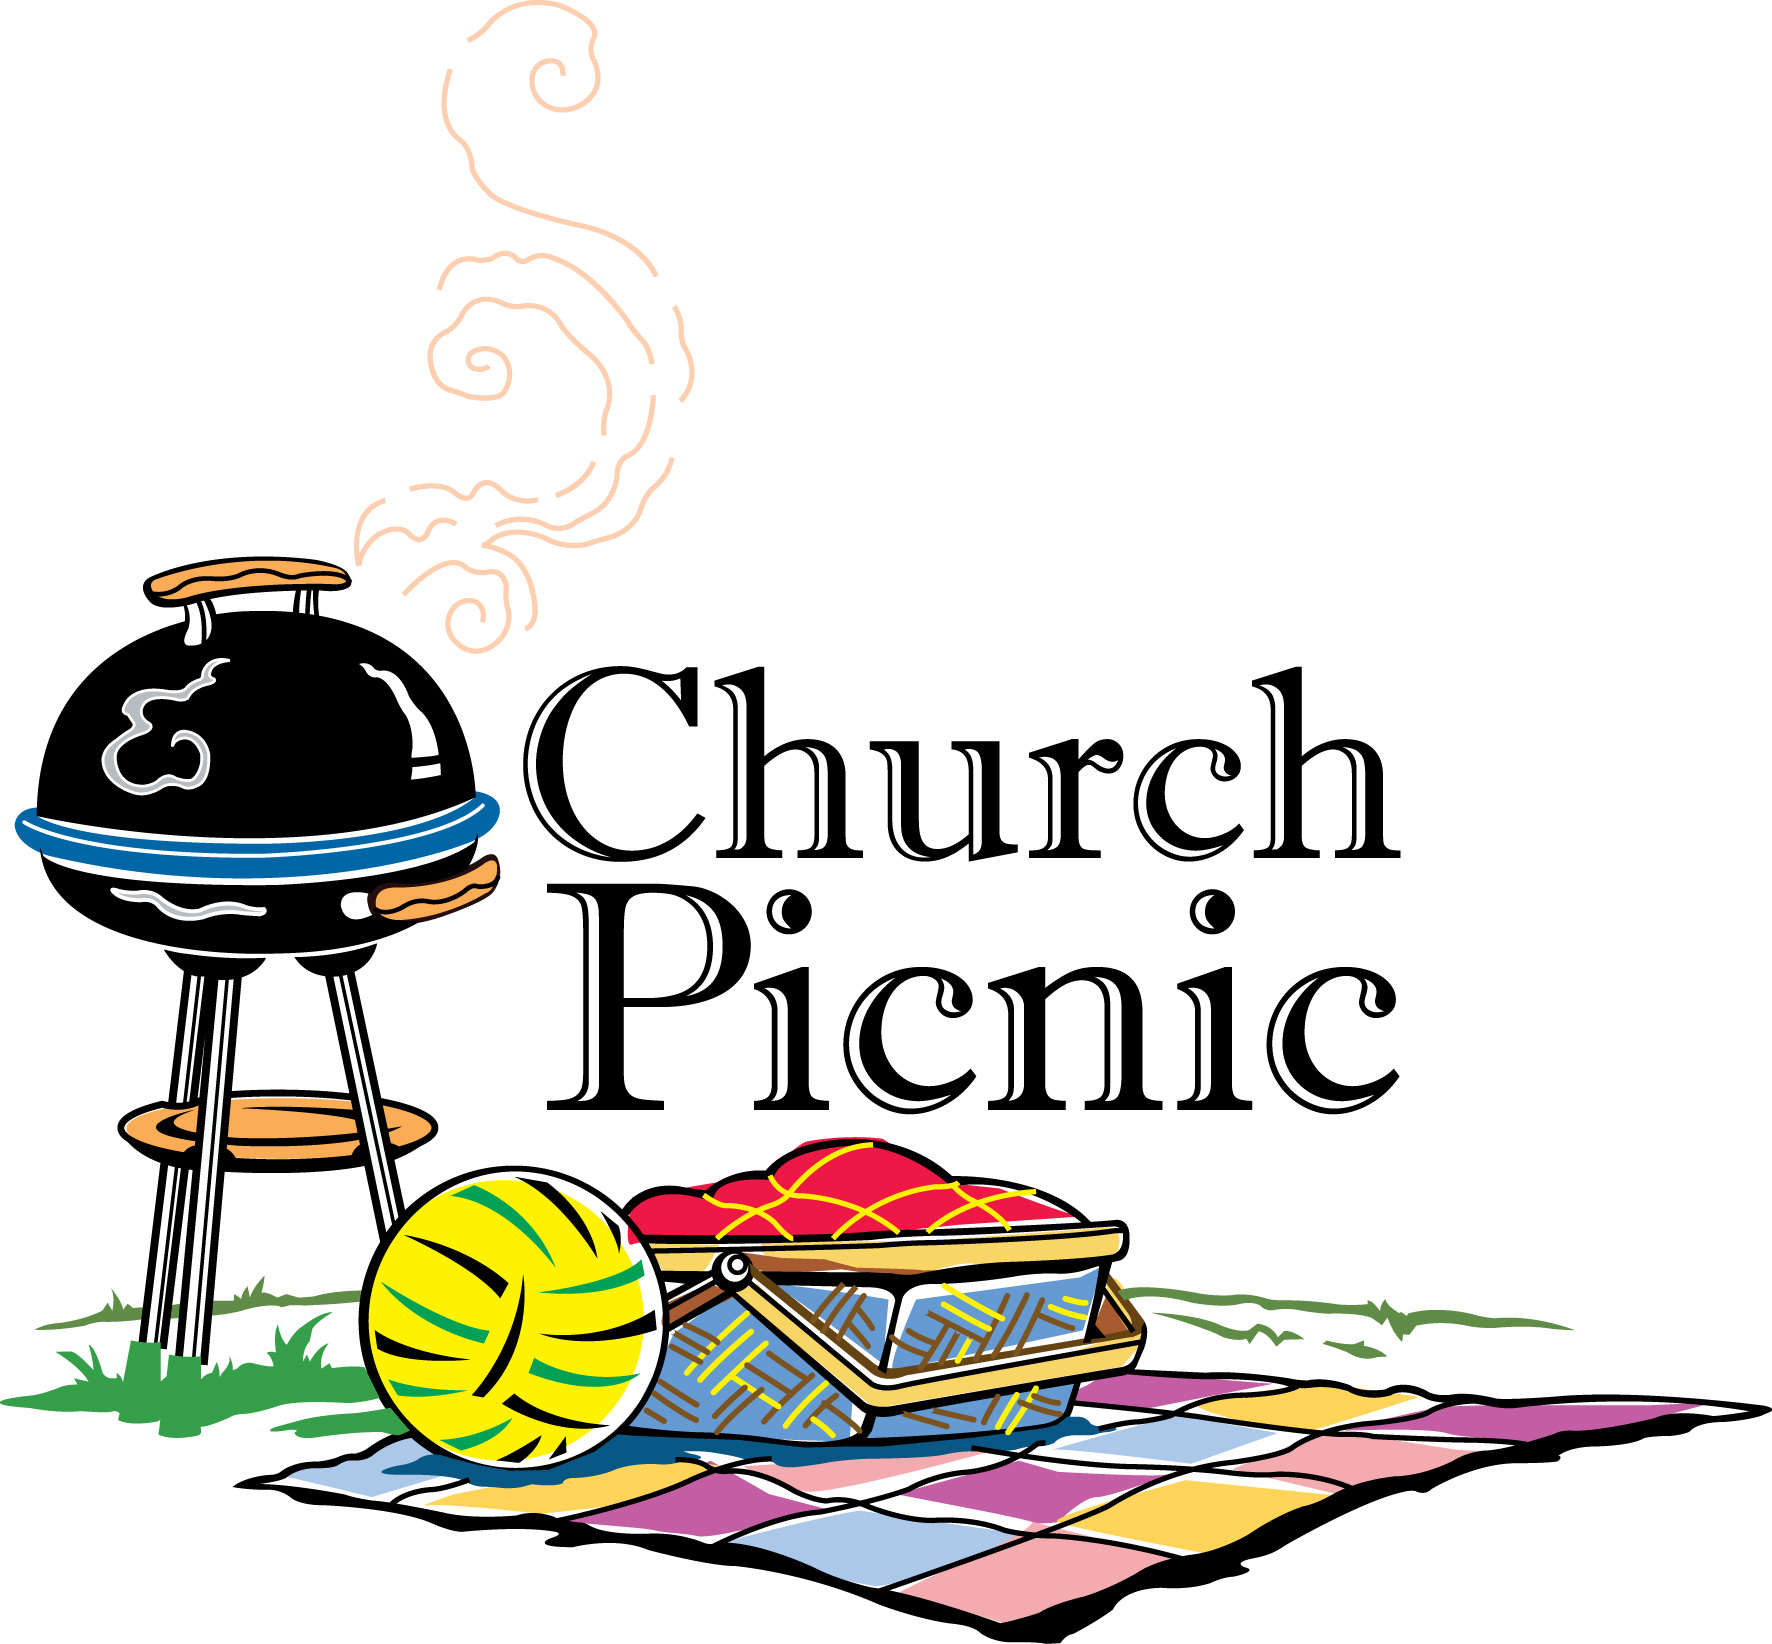 picnic clipart free download - photo #4